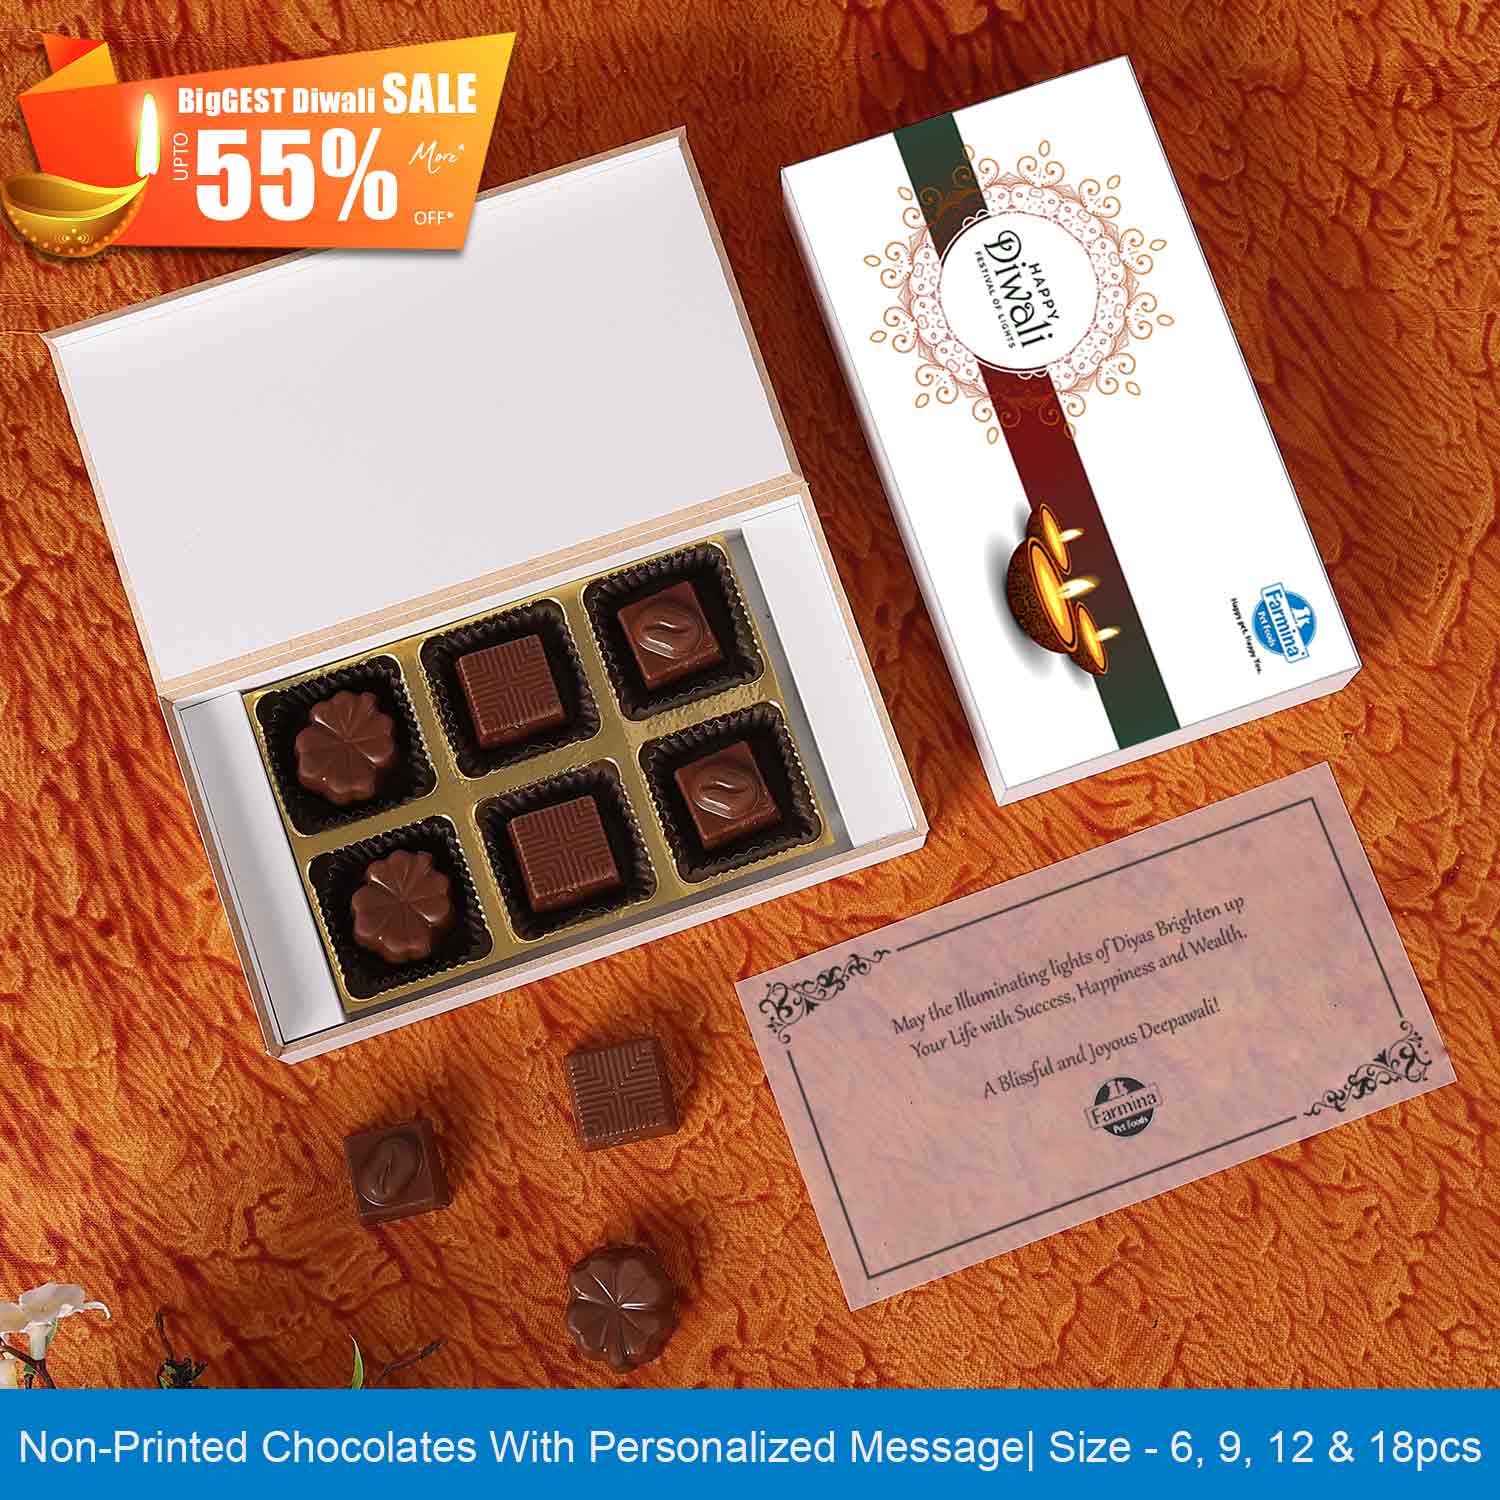 Chocolate with photo printed on it handmade chocolate boc online personalised chocolate message corporate chocolate gidt boxes